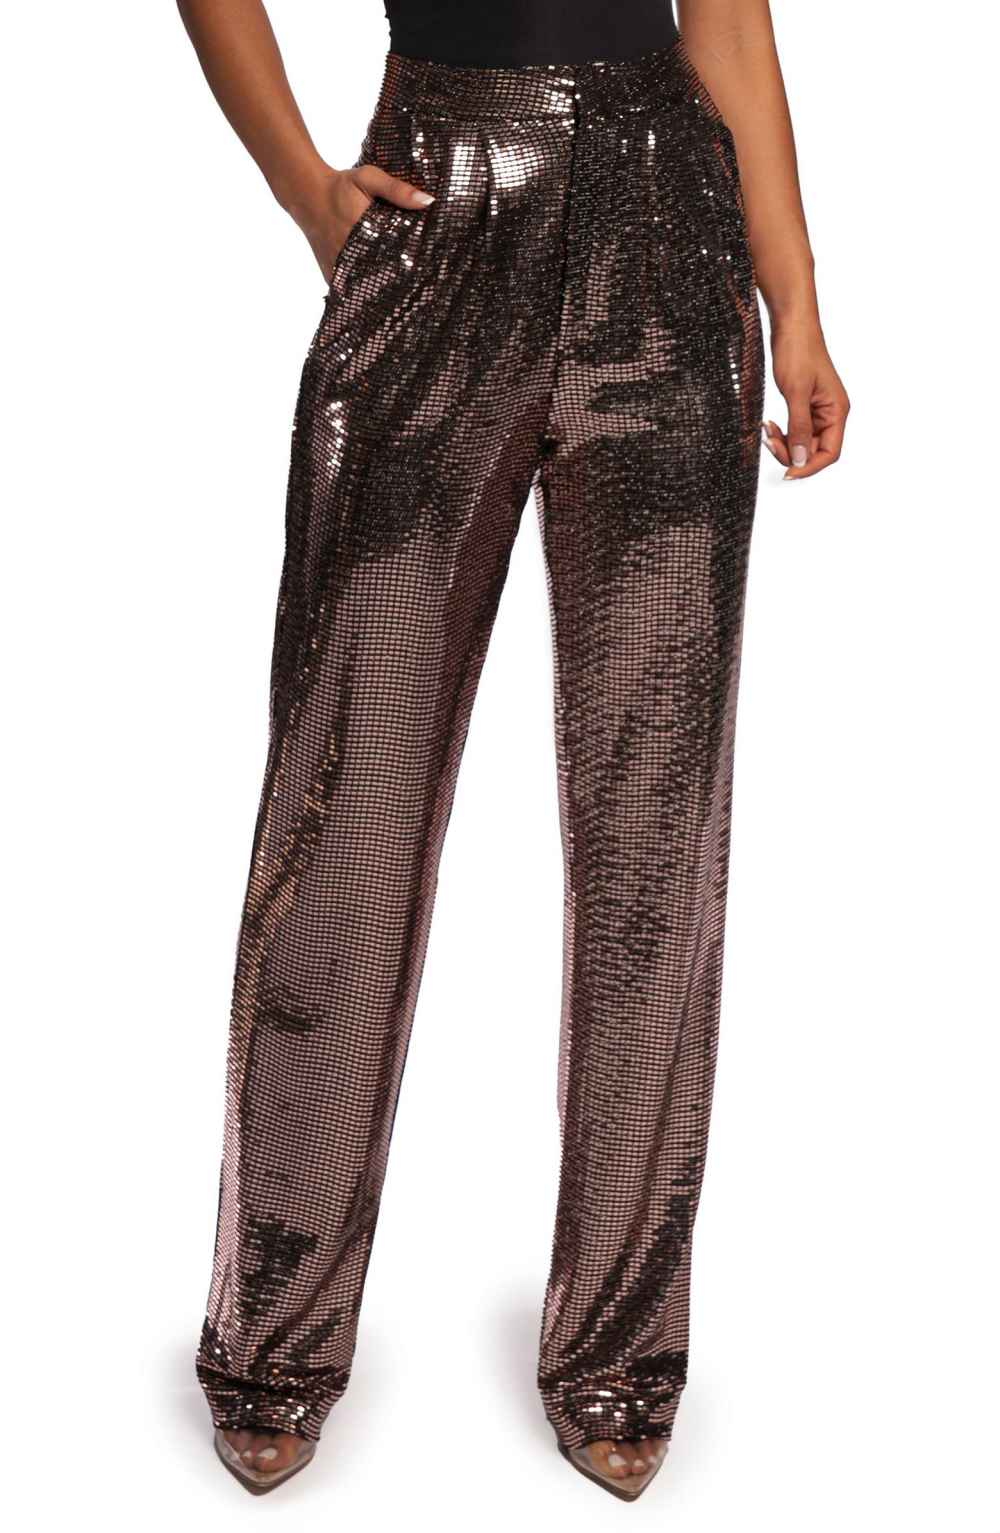 JLUXLABEL Sequin Pants Embody Everything We Love About Disco Style | Us ...